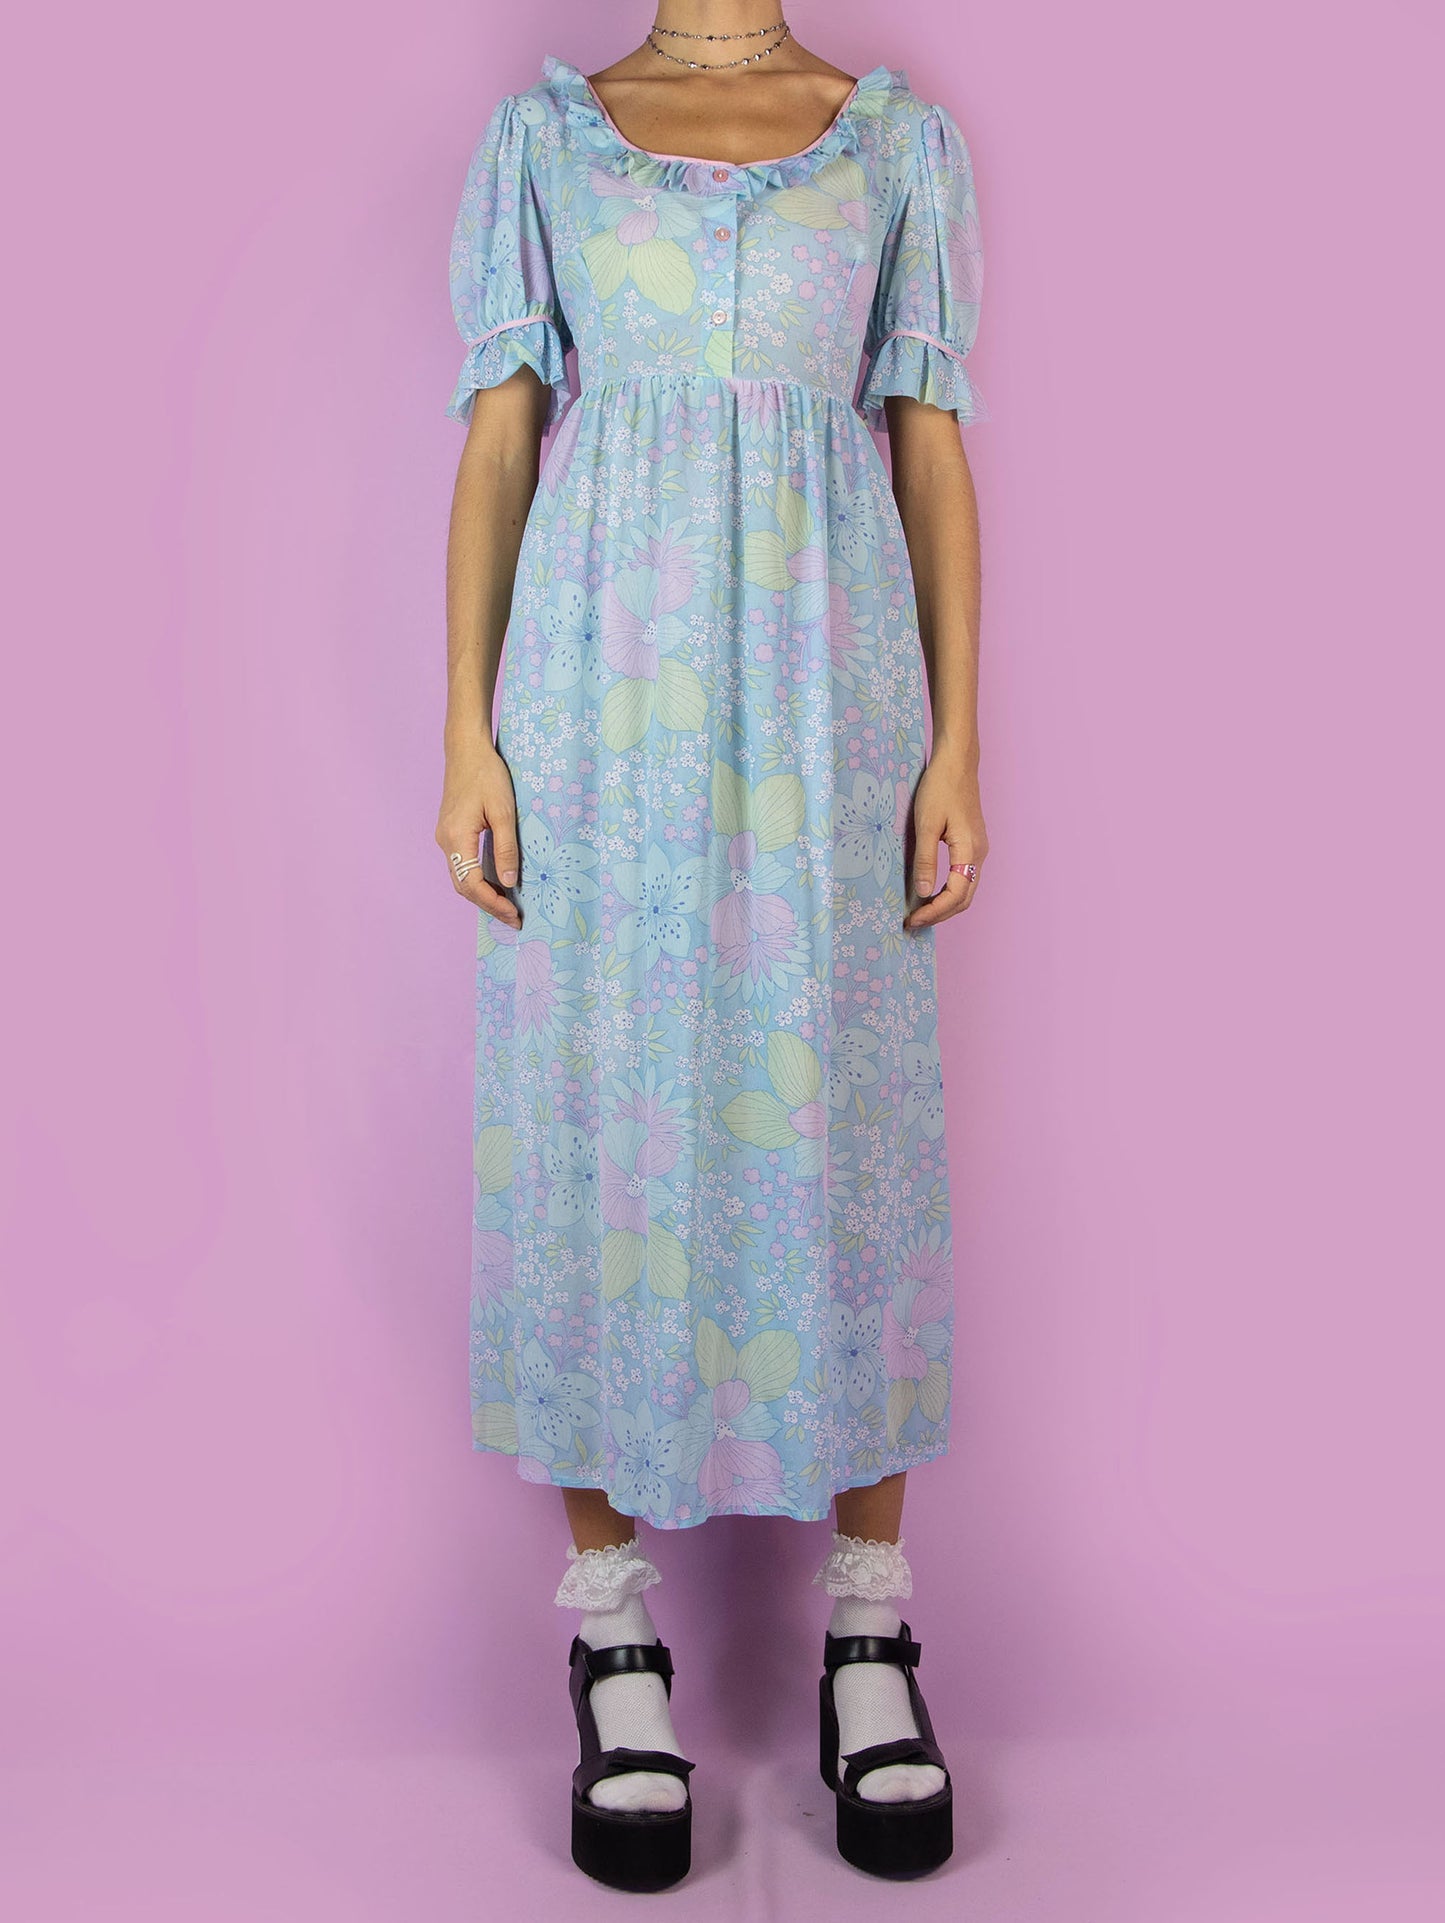 The Vintage 70s Floral Puff Sleeve Prairie Dress is a blue semi-sheer maxi dress in a multicolored floral pattern with short puff sleeves, ruffles, and buttons at the front. Country western inspired 1970s boho midi dress.